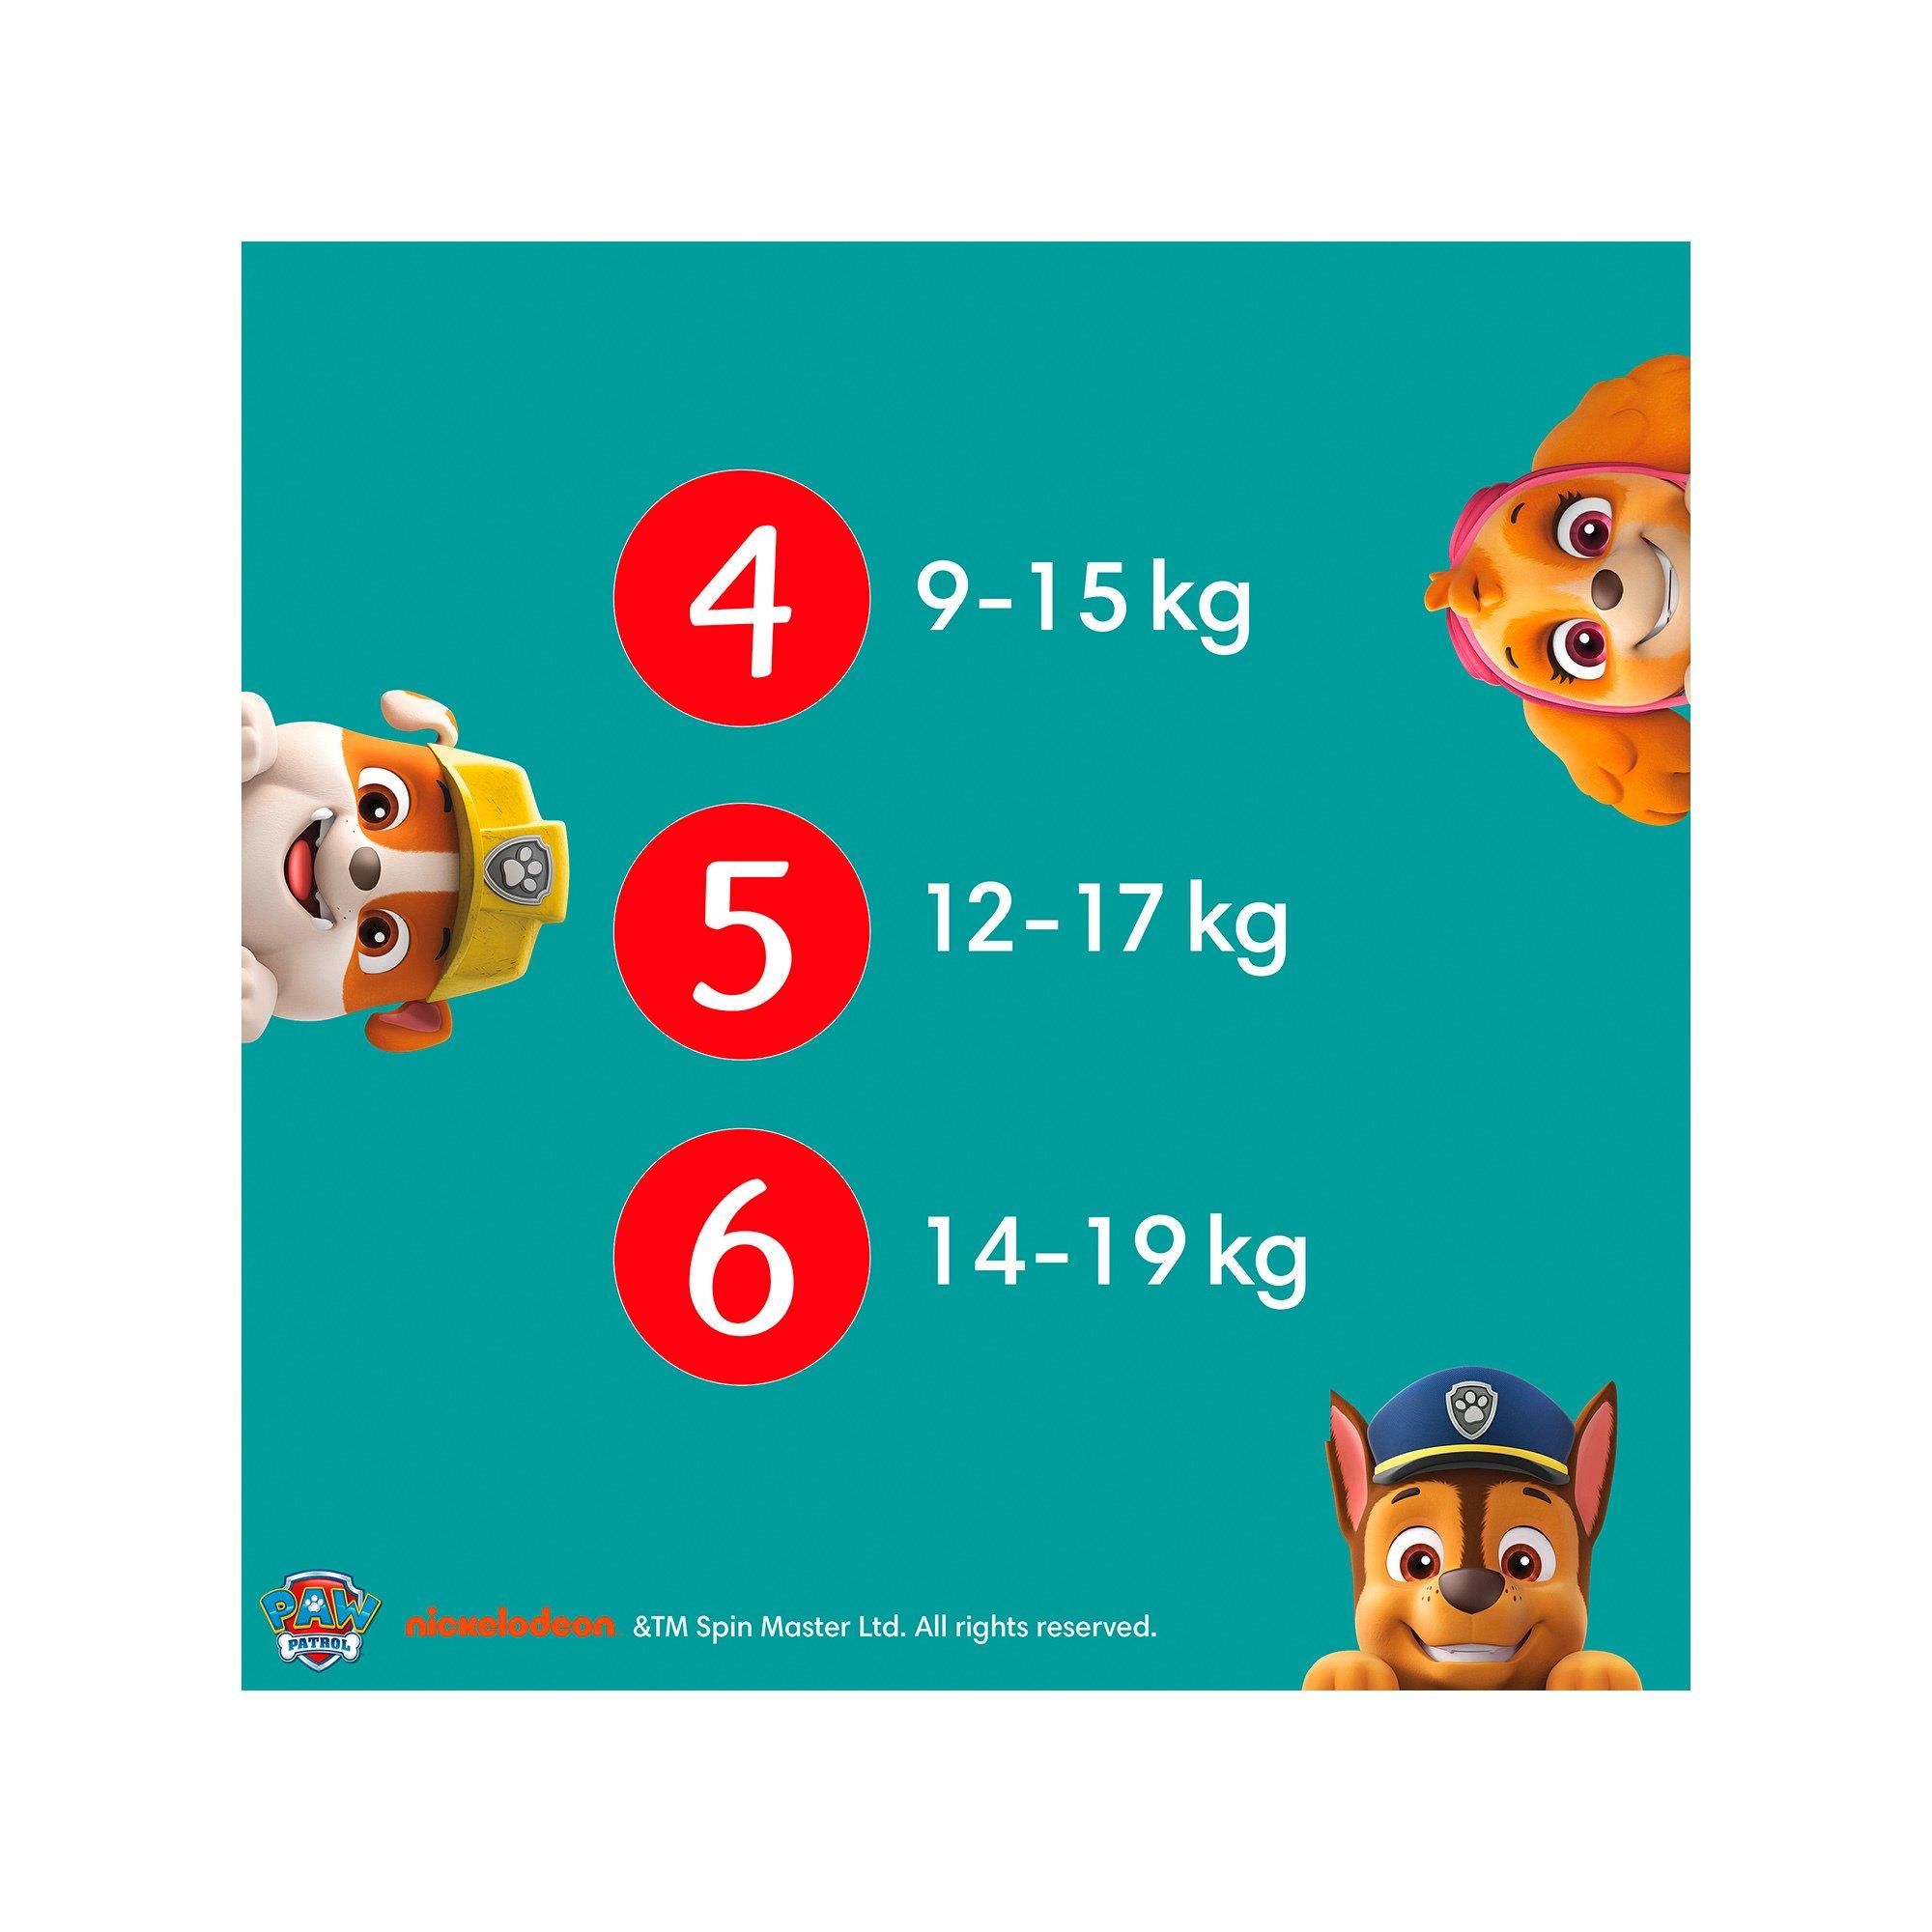 Pampers  Baby-Dry Pants Paw Patrol Limited Edition, Taglia 5 